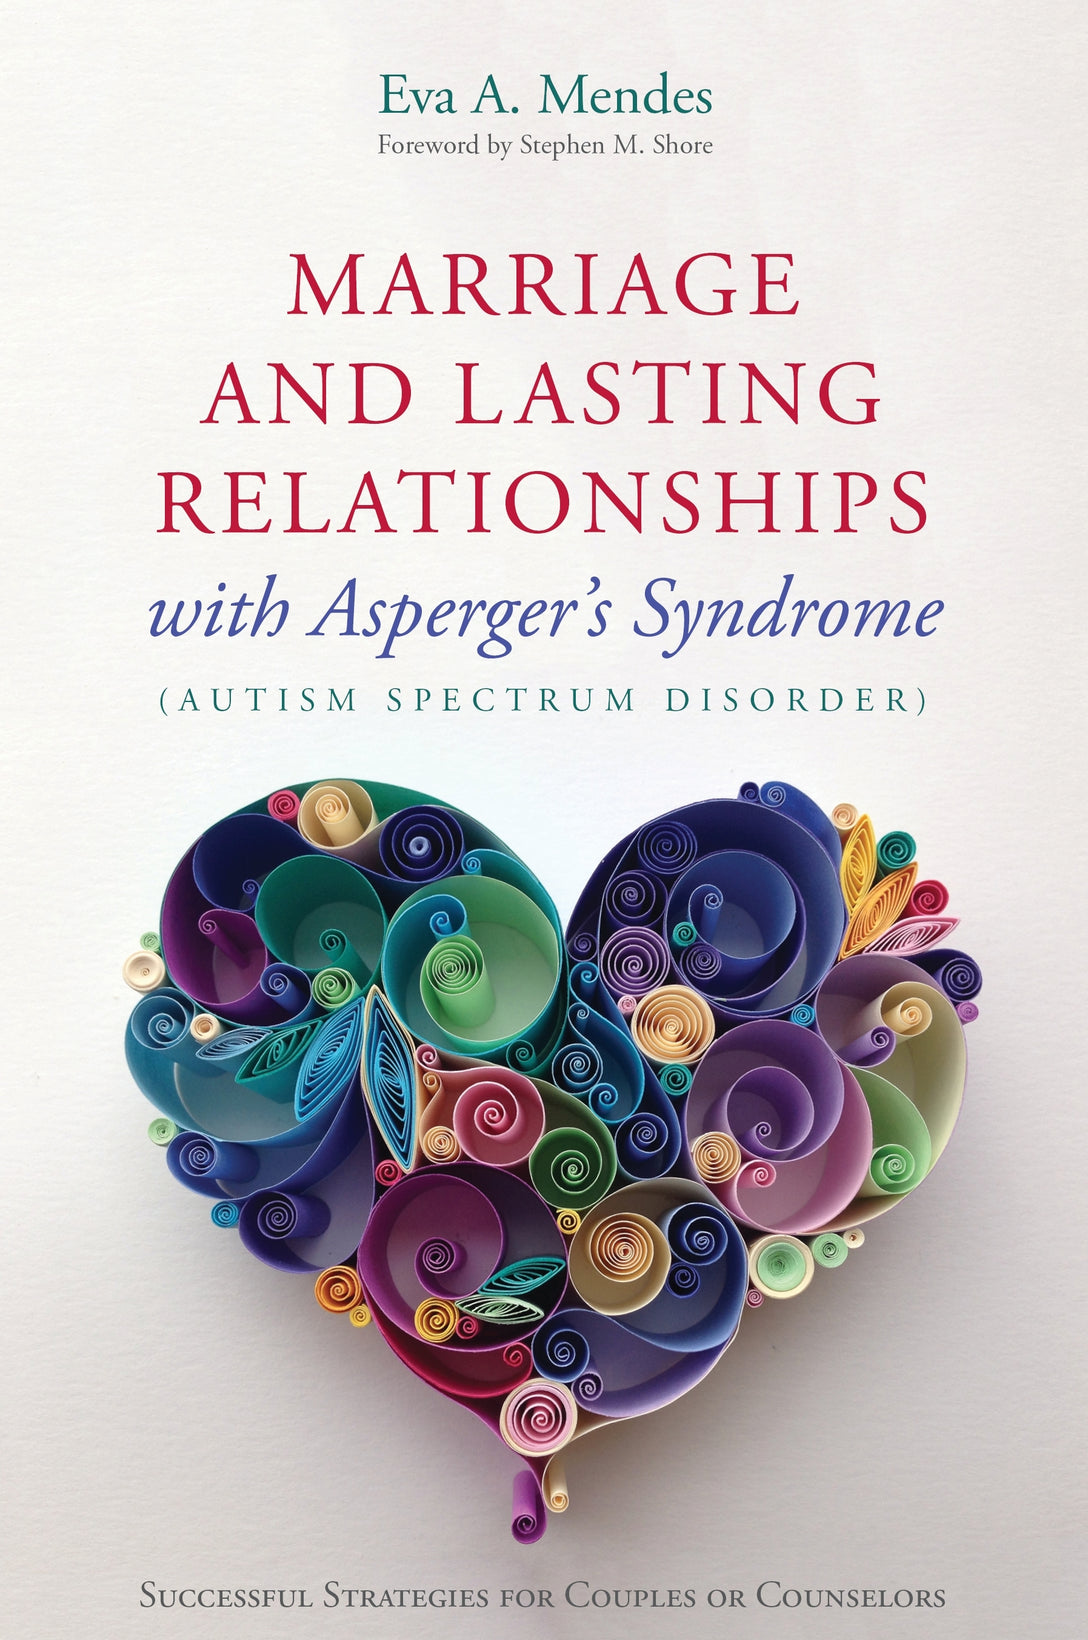 Marriage and Lasting Relationships with Asperger's Syndrome (Autism Spectrum Disorder) by Eva A. Mendes, Stephen M. Shore